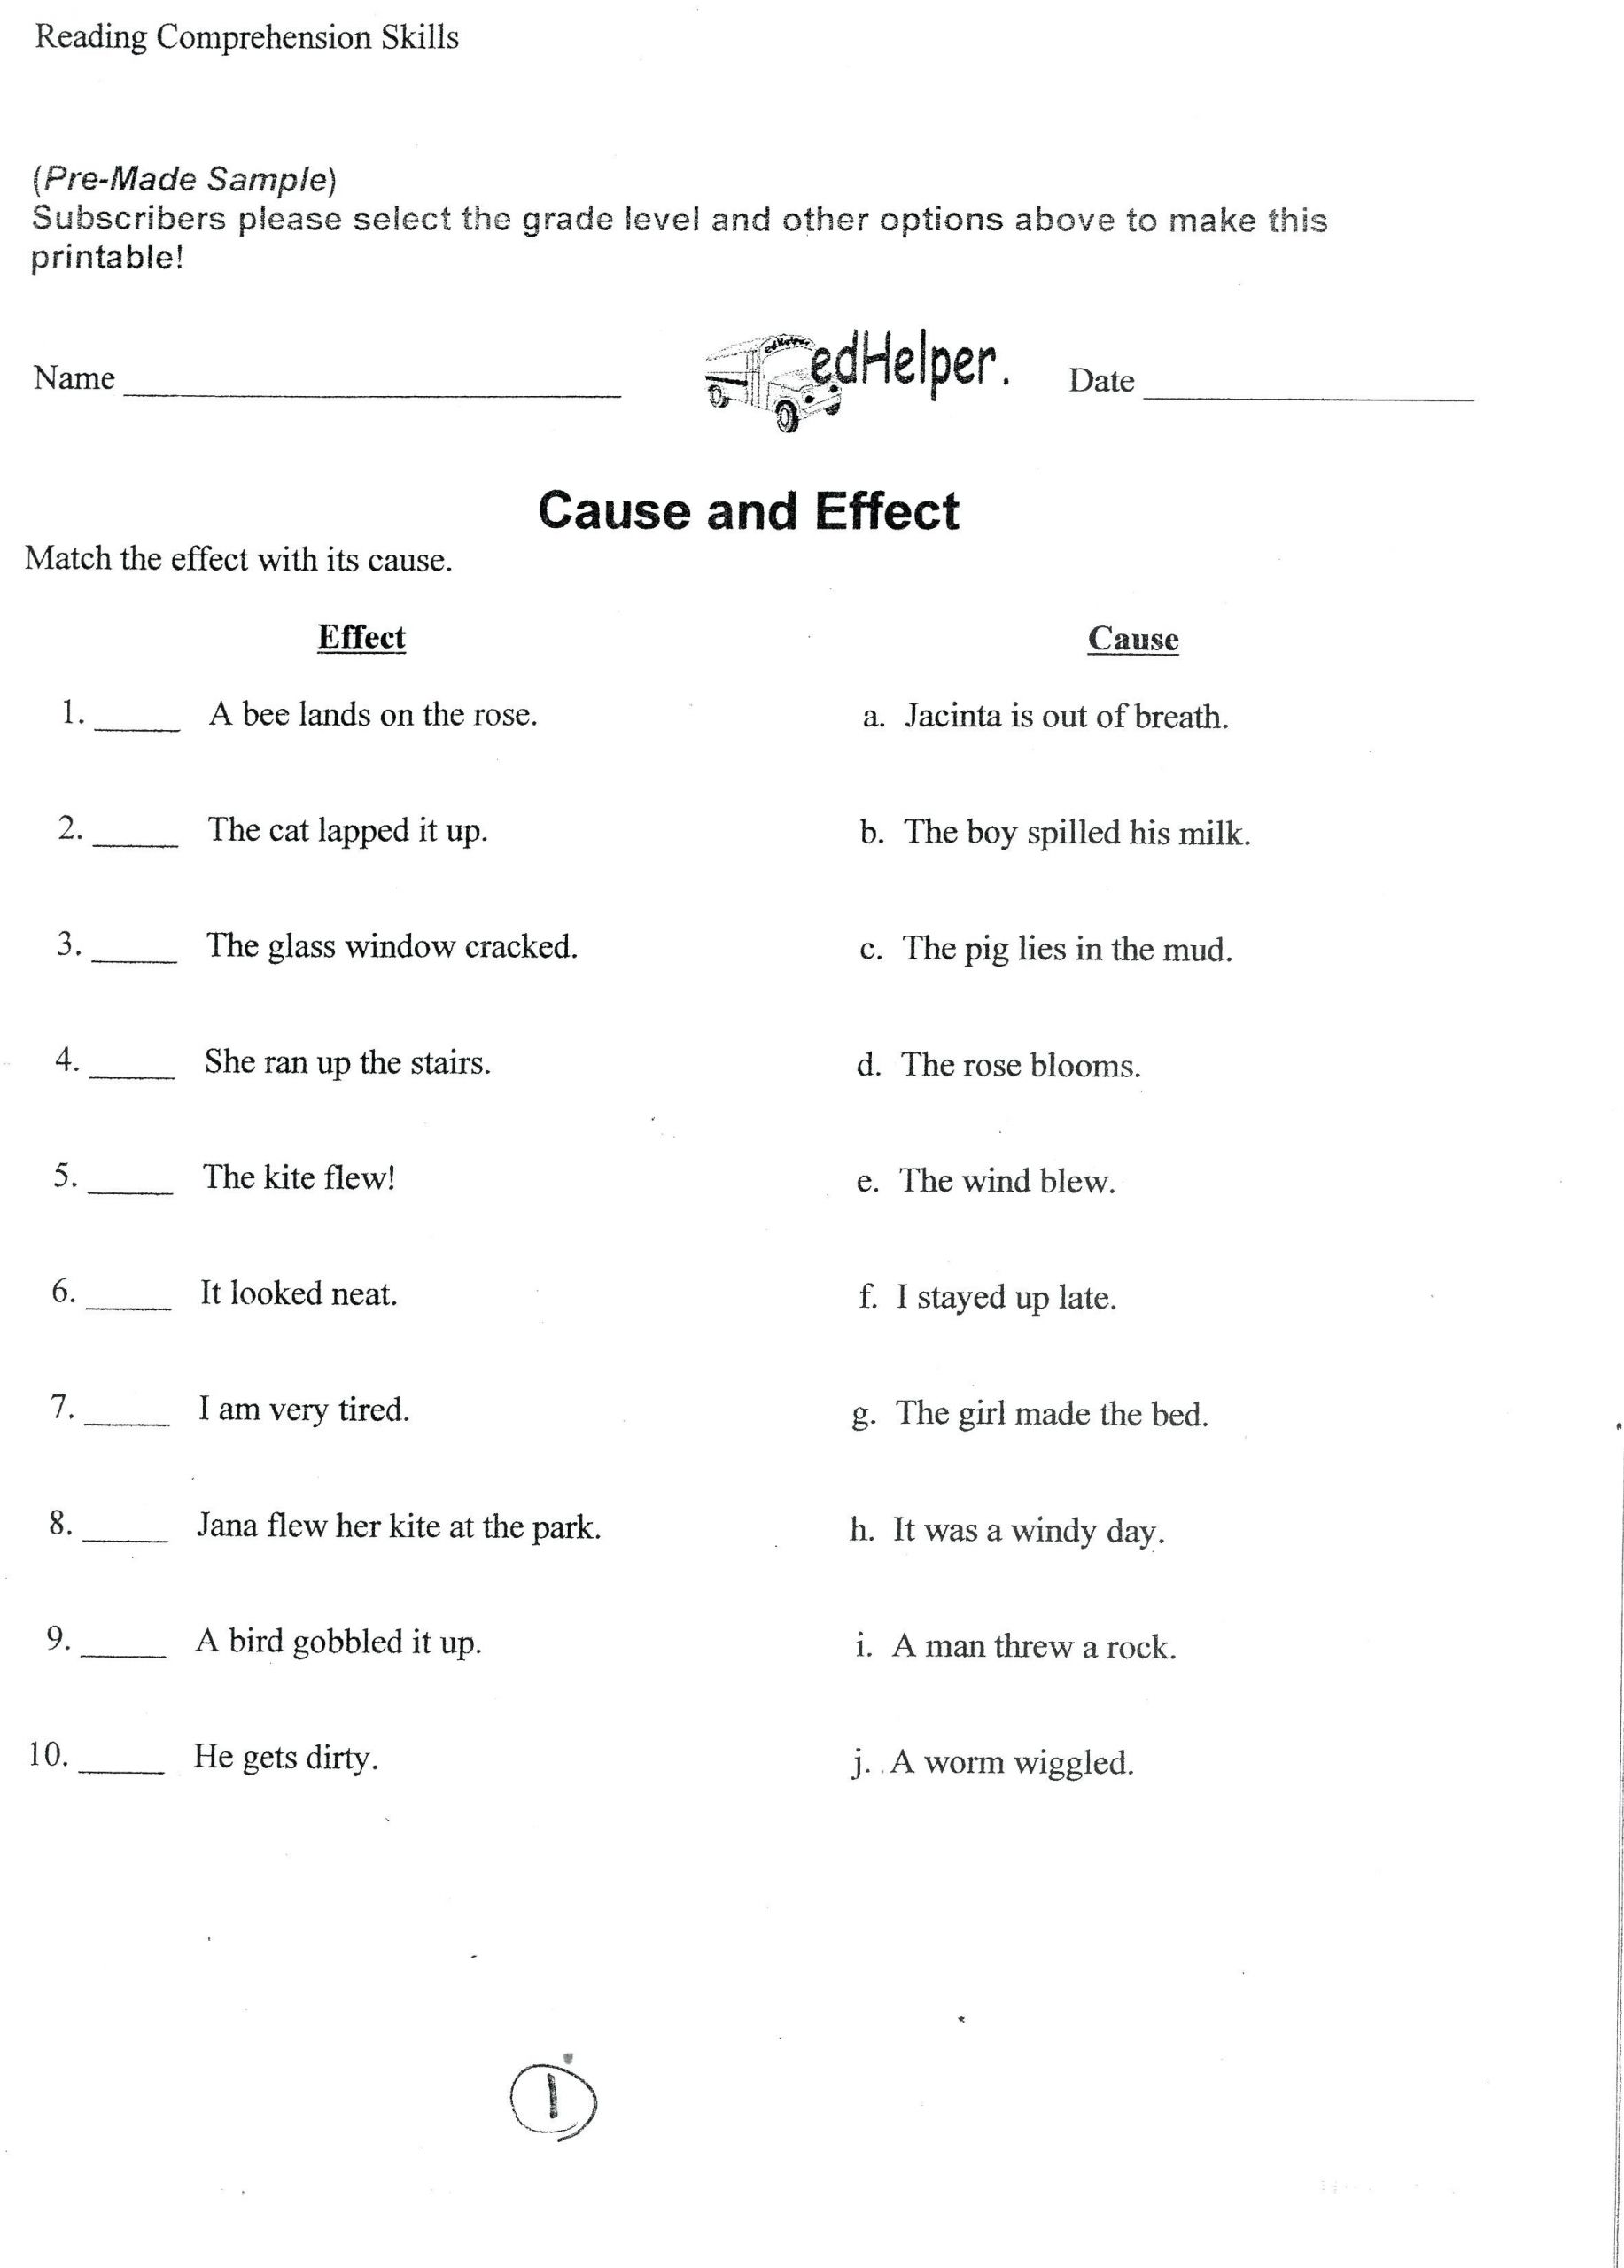 Free Math Worksheets Second Grade 2 Subtraction Subtract 2 Digit Numbers with Regrouping